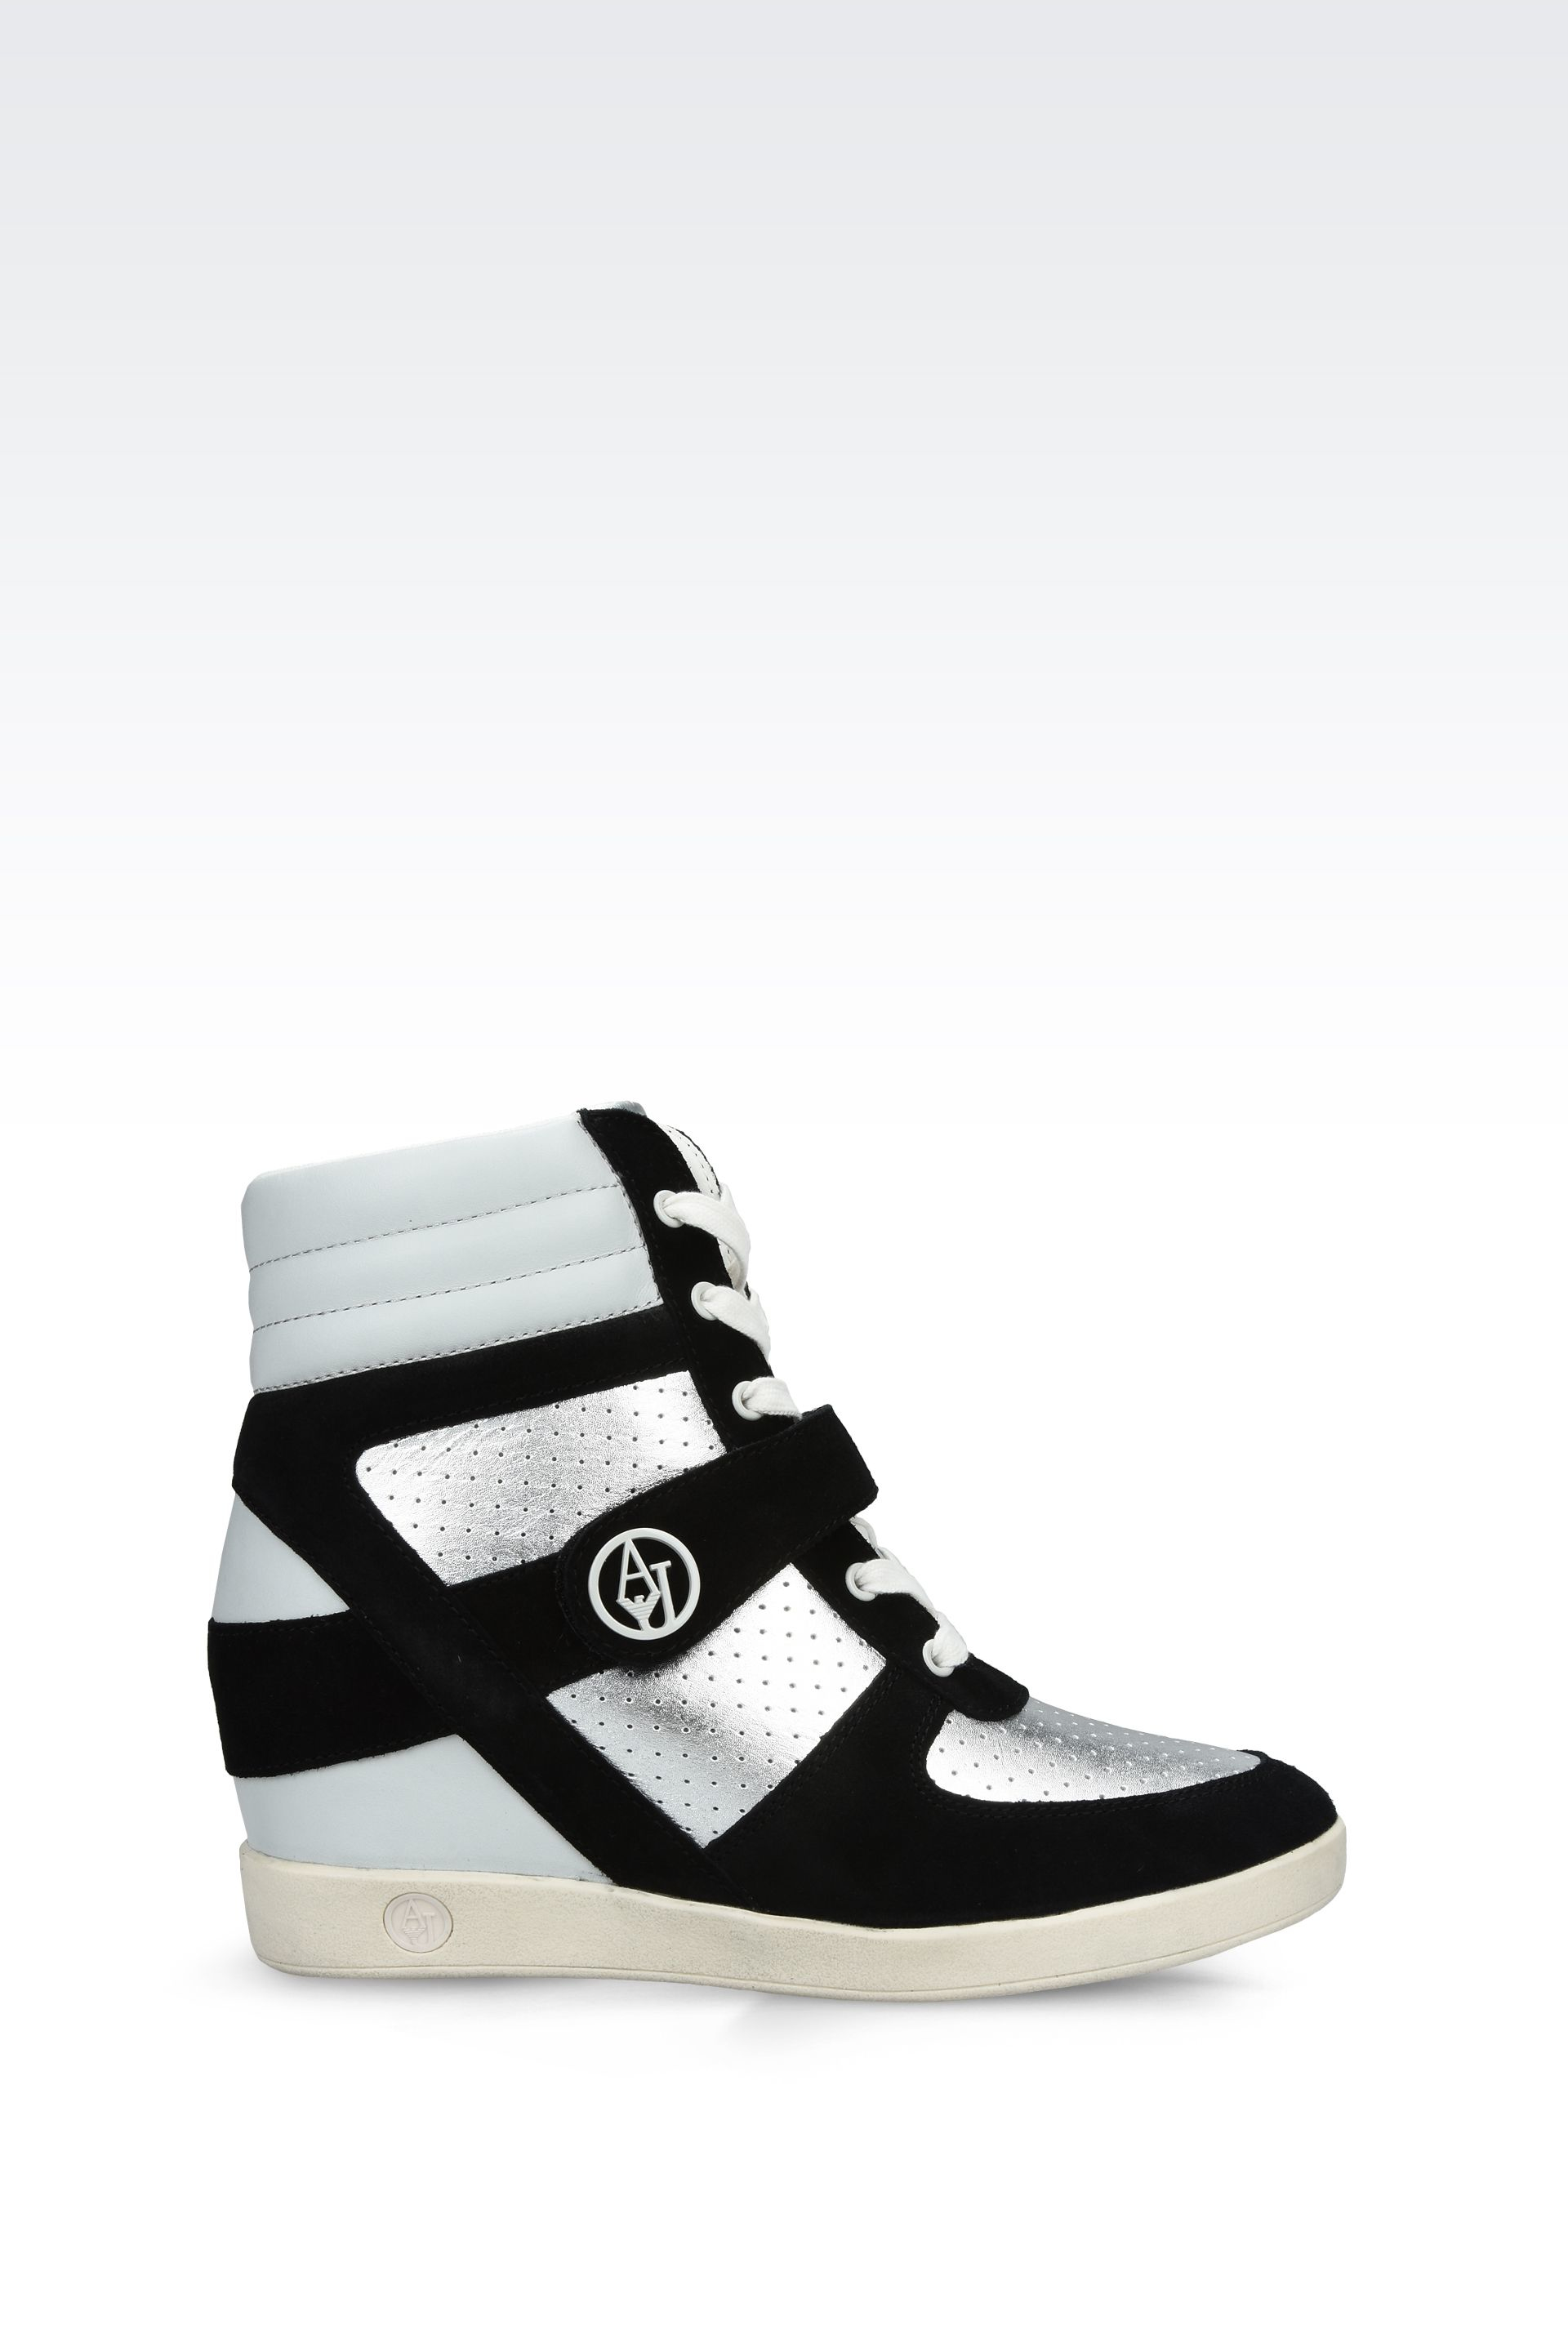 armani jeans high top sneakers